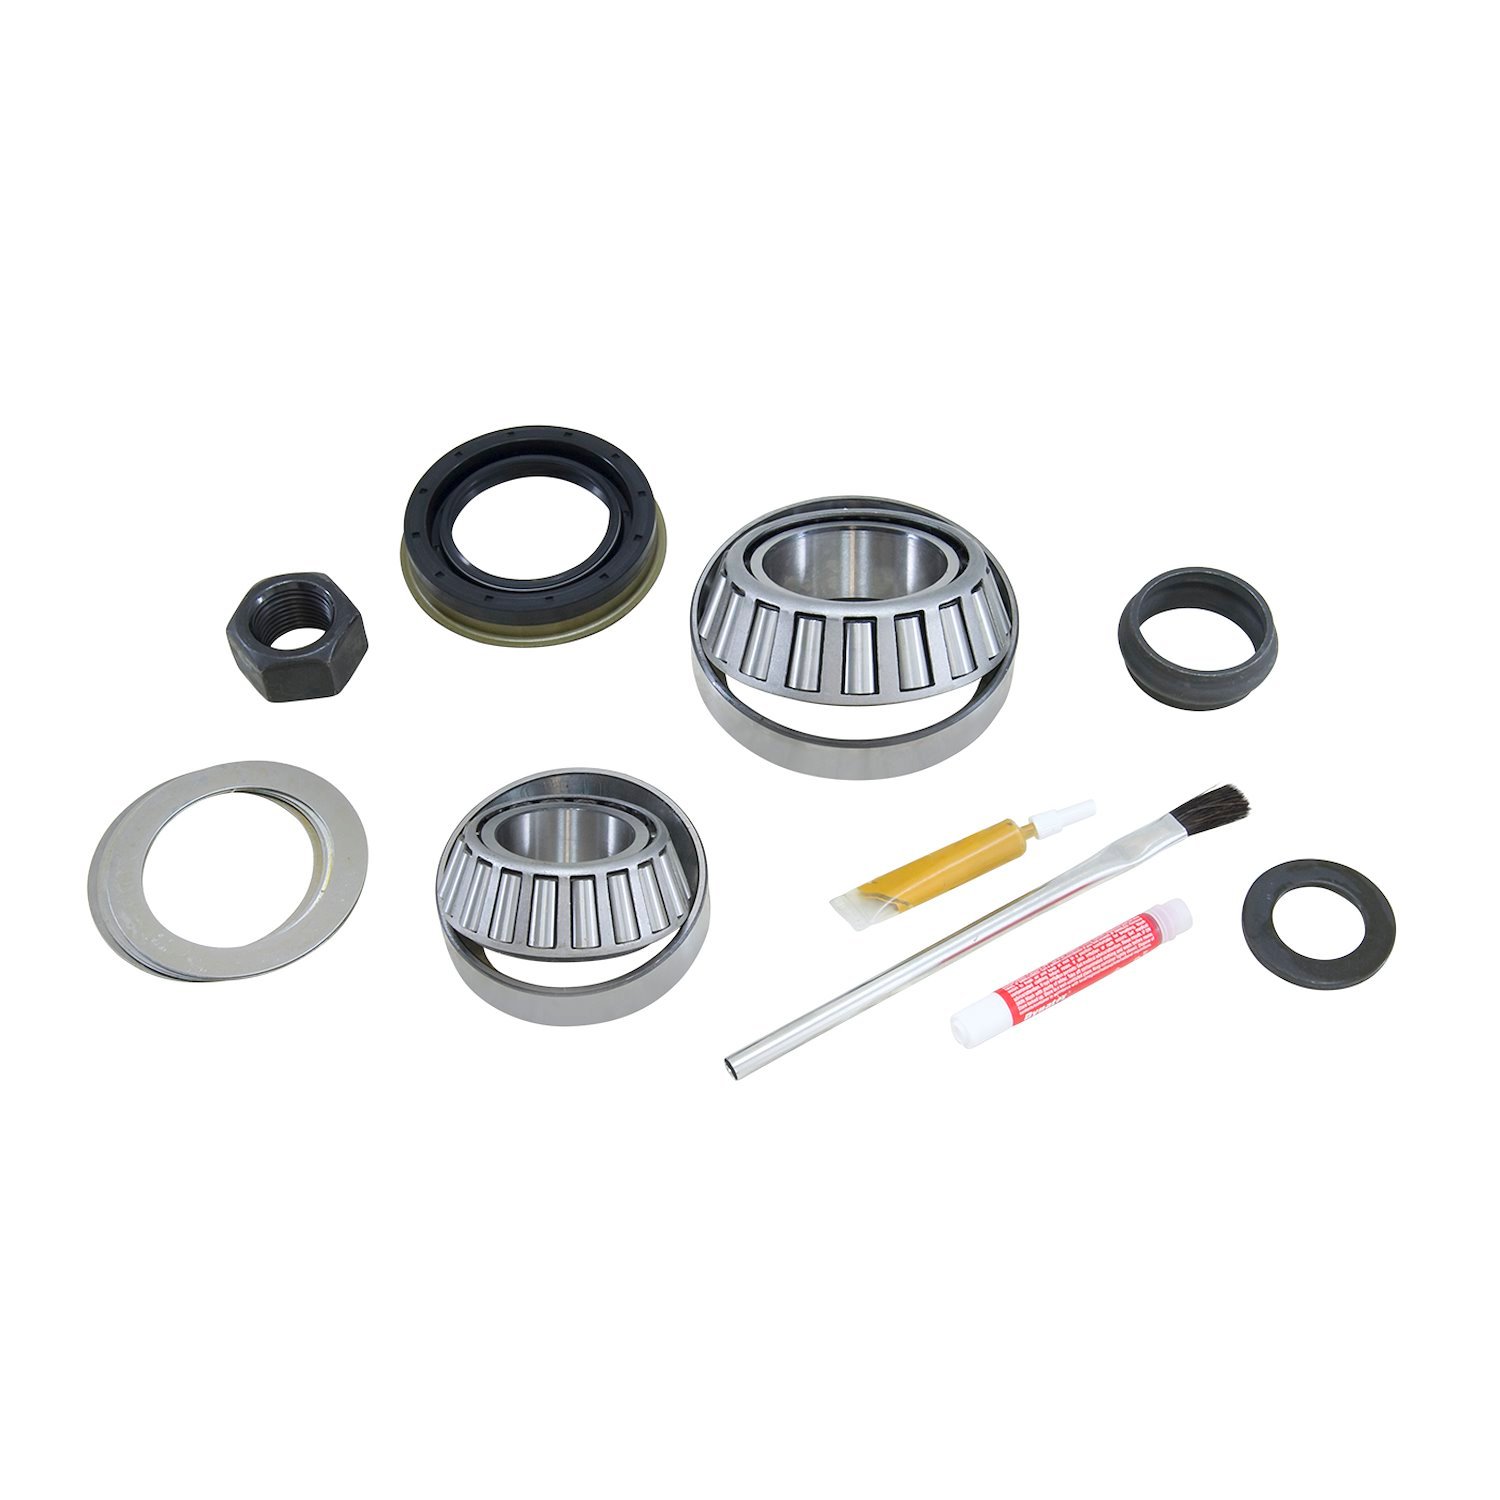 Pinion Install Kit For Dana 60 Rear Differential